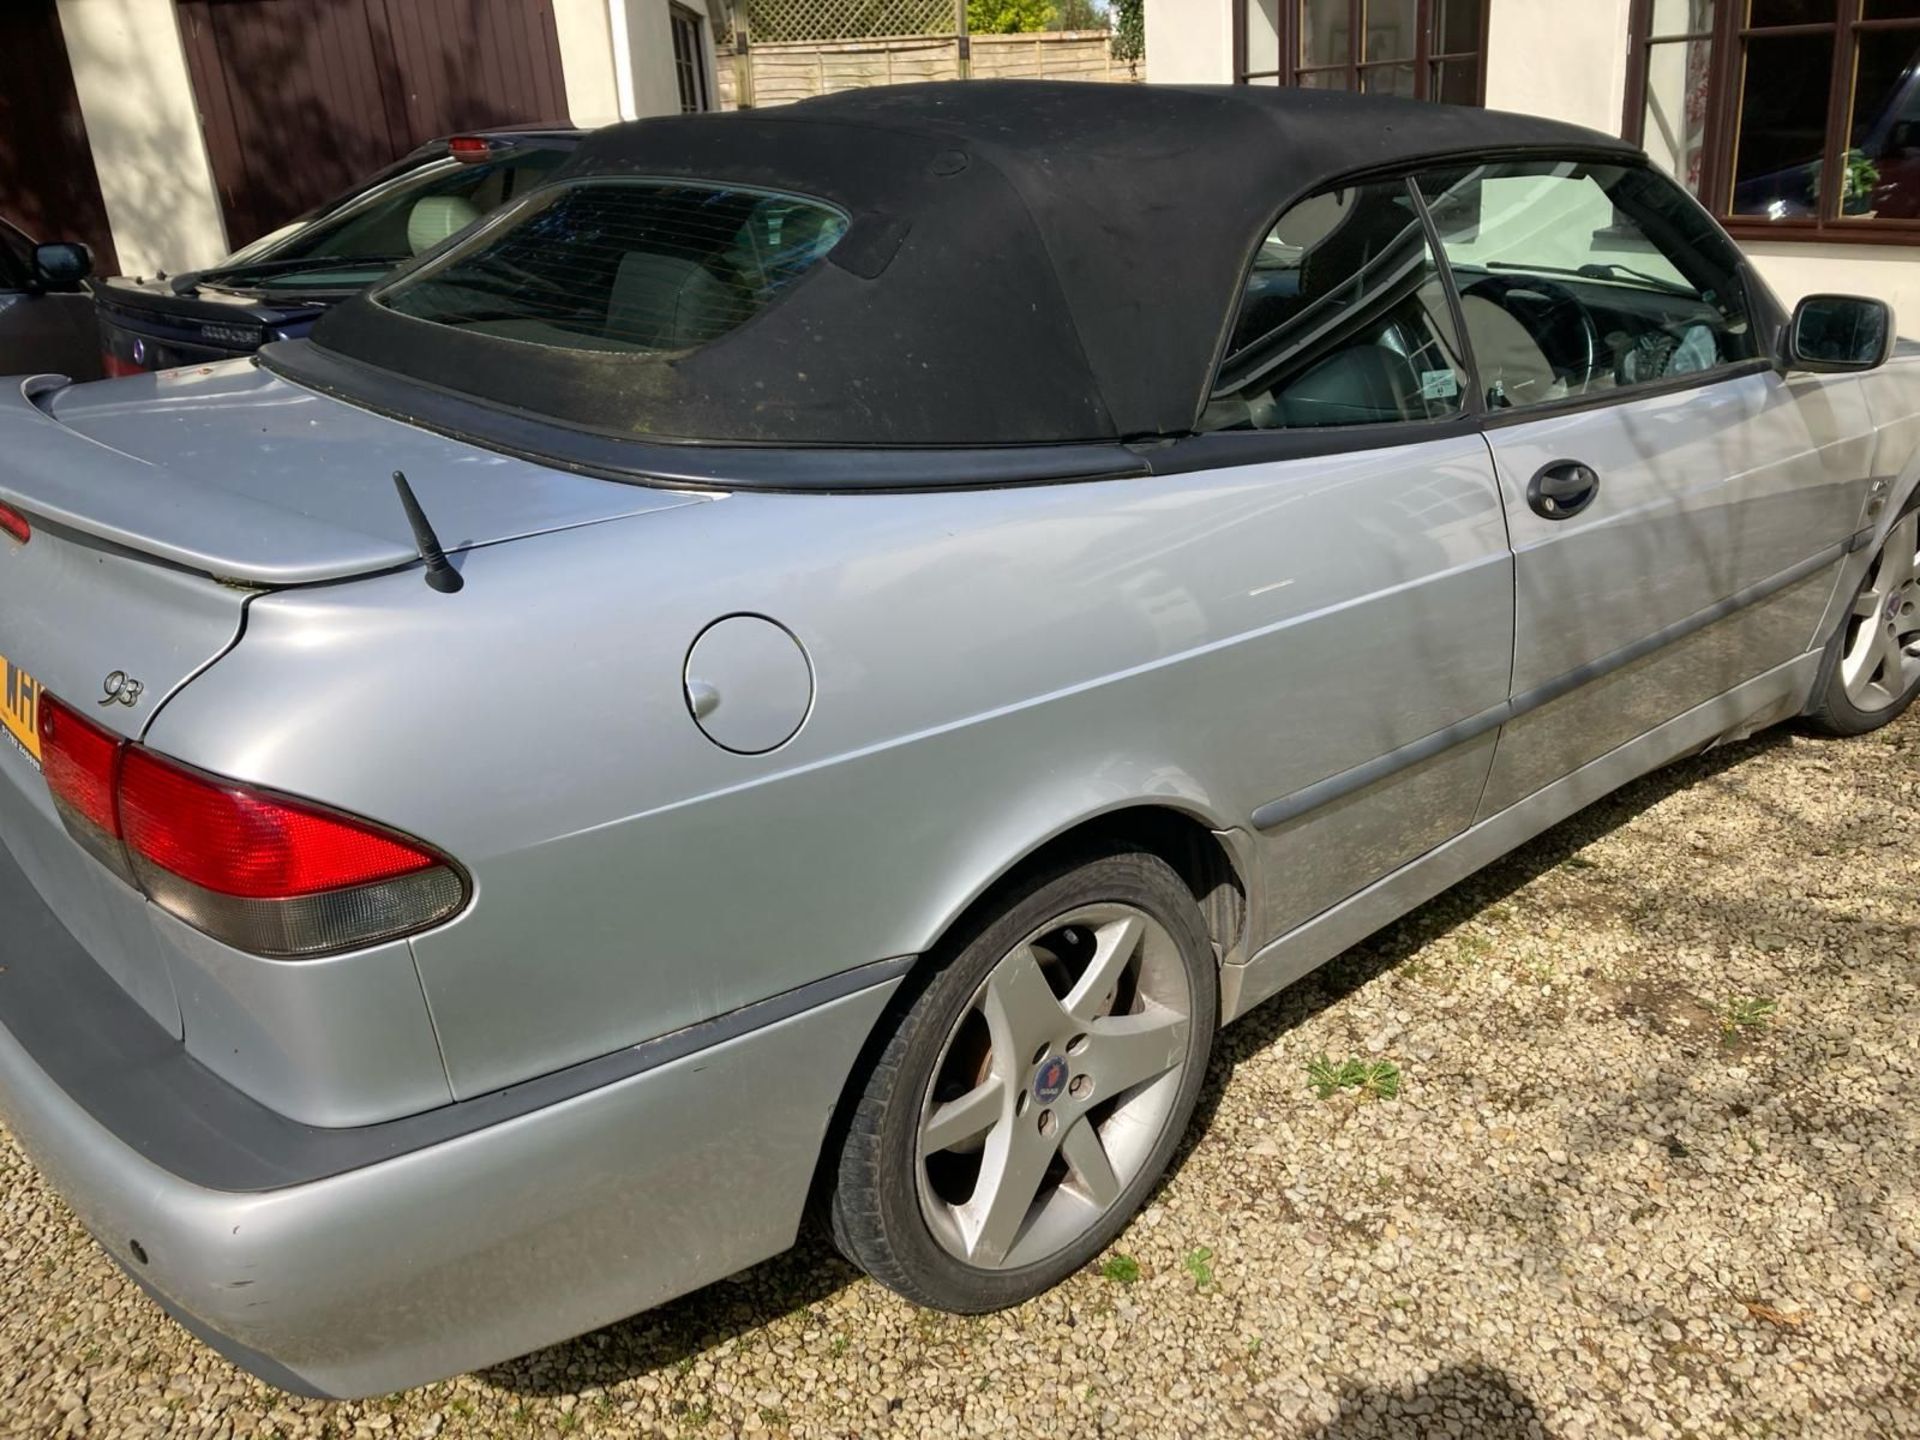 2002 Saab 9-3 Aero Convertible with 11 months MOT - Offered at No Reserve - Image 10 of 24